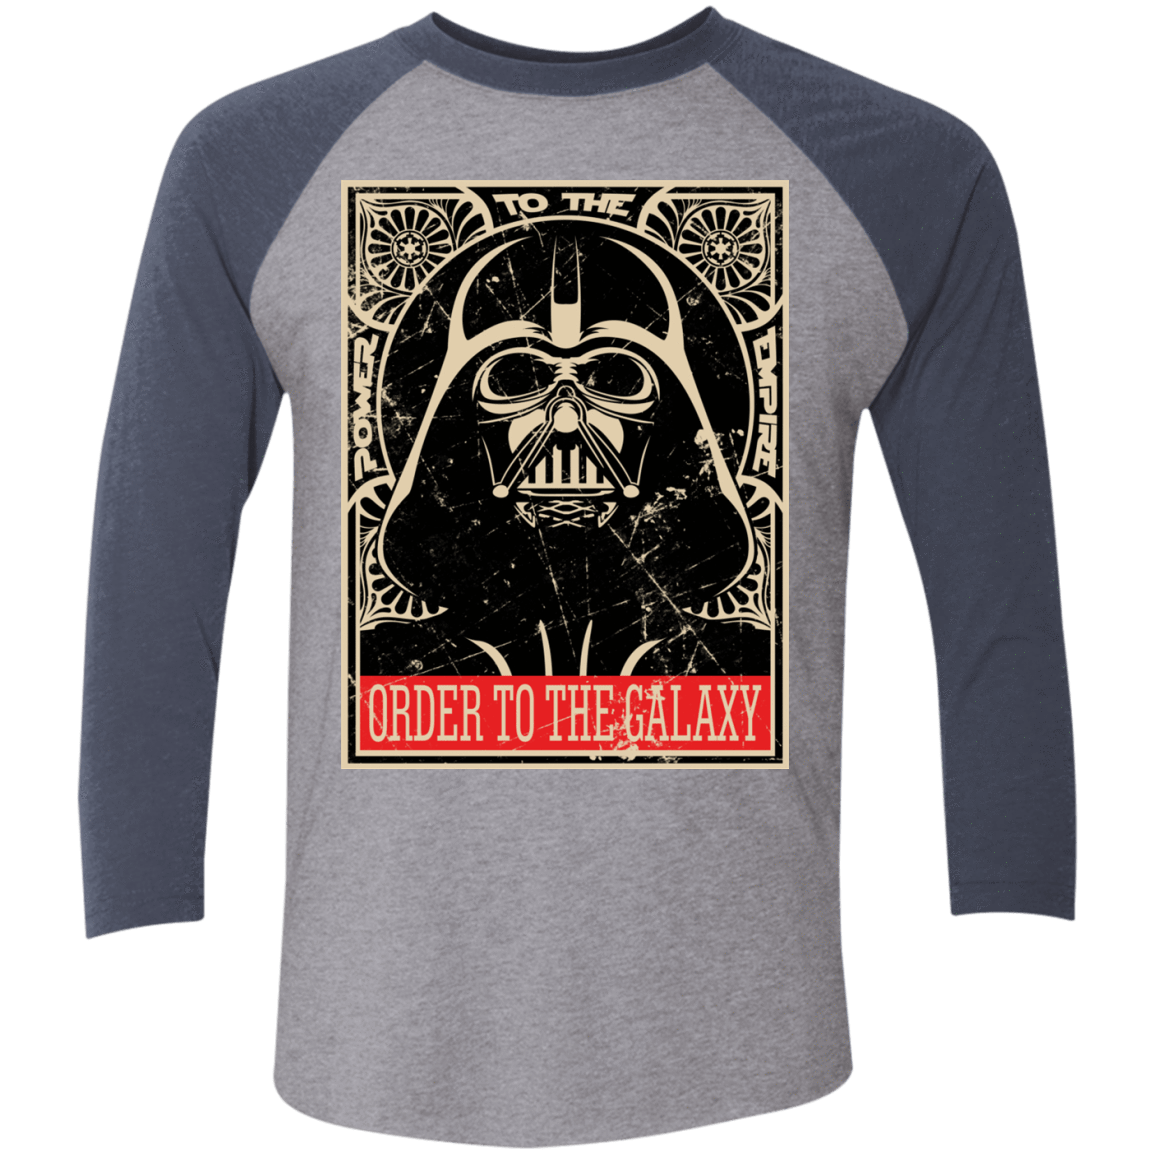 T-Shirts Premium Heather/Vintage Navy / X-Small Order to the galaxy Men's Triblend 3/4 Sleeve